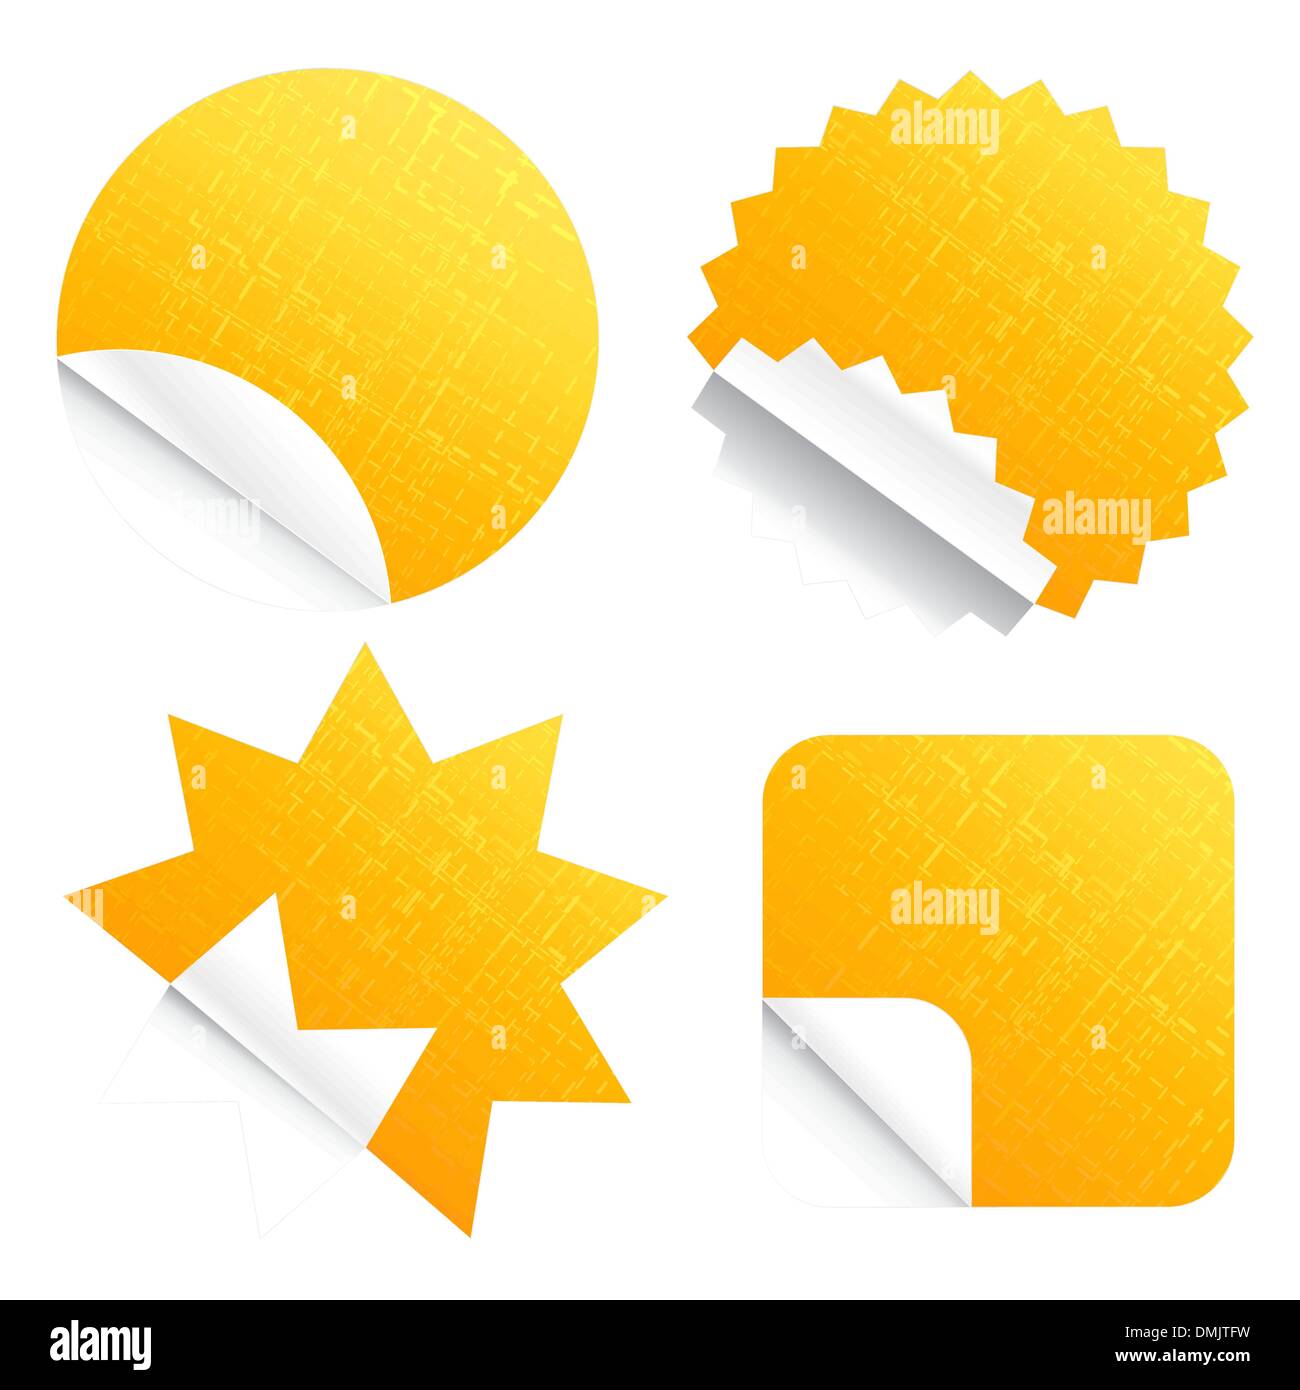 Peeling stickers technological set Stock Vector